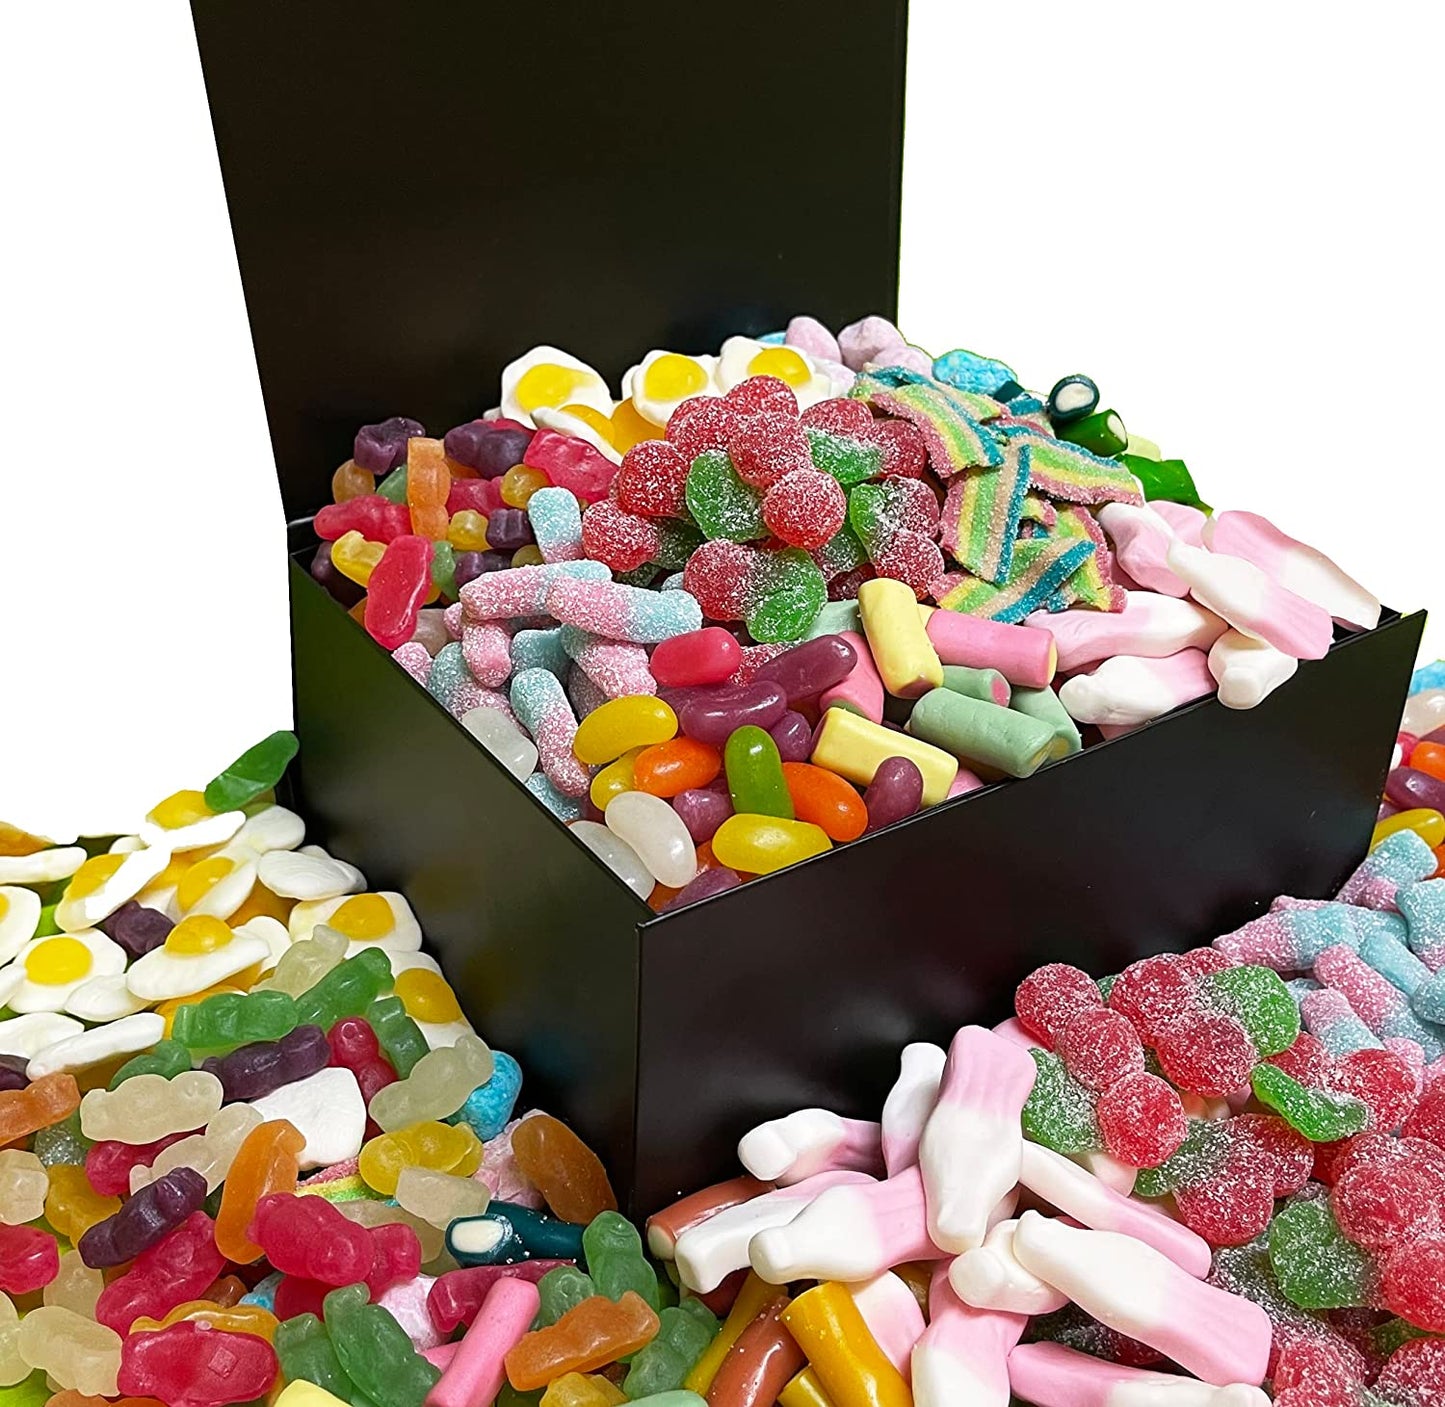 Retro Sweets Candy Box Jelly Beans, Fizzy Bubblegum Bottles, Bonbons, Fried Eggs Sweets and More